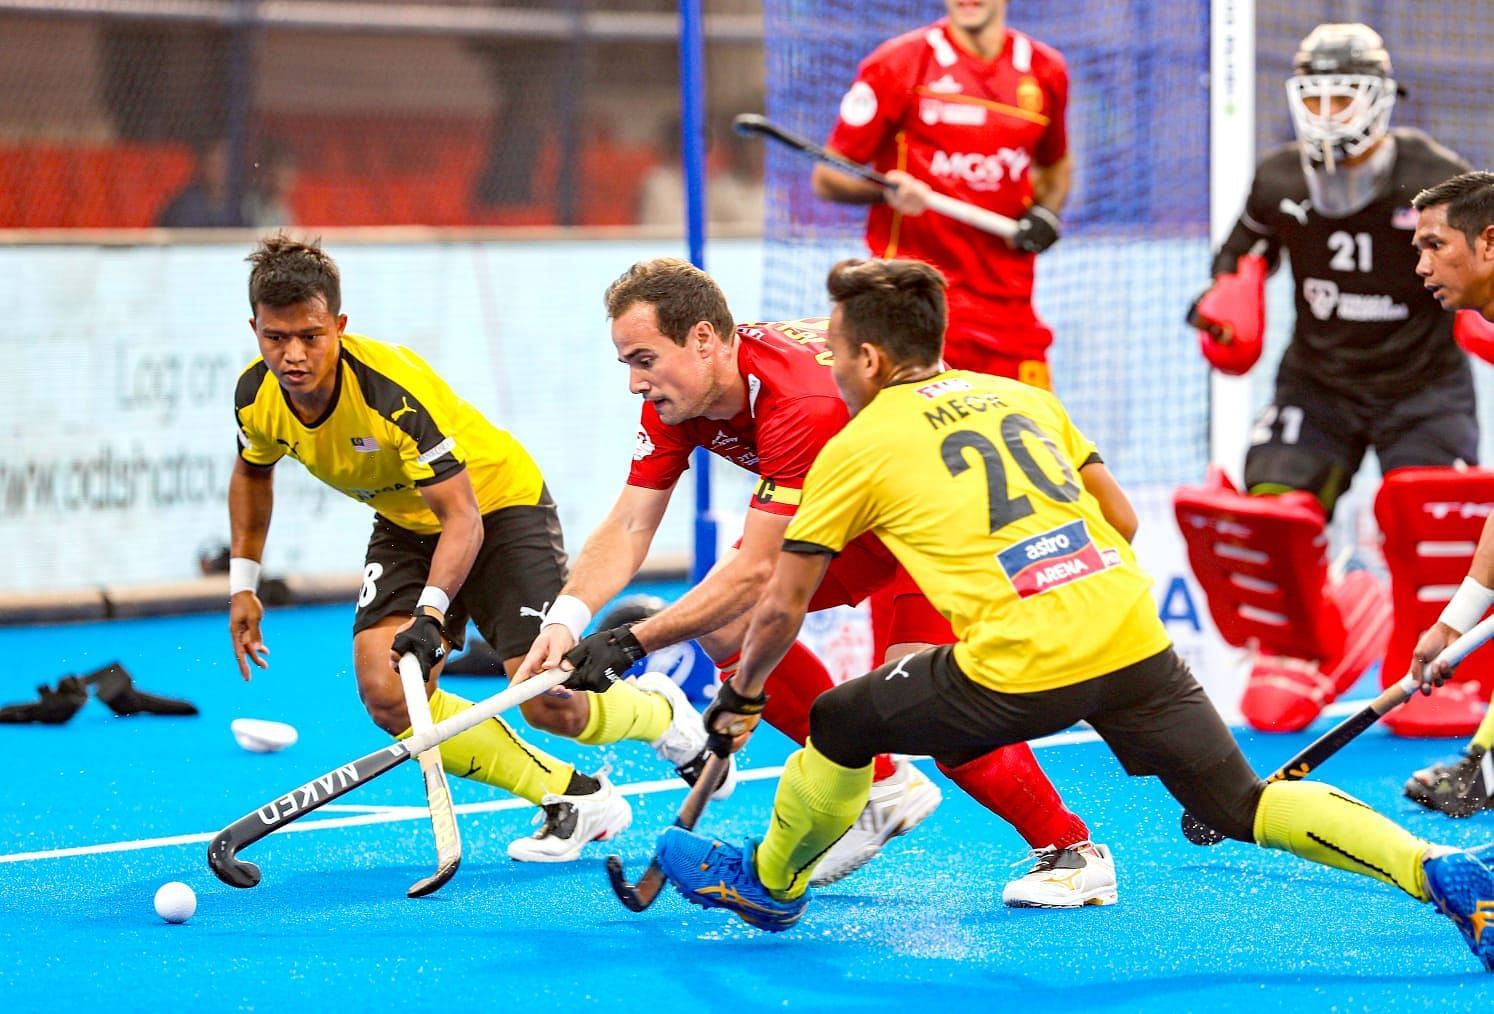 Malaysia and Spain team in action in an earlier match (Image Courtesy: Twitter/Hockey India)